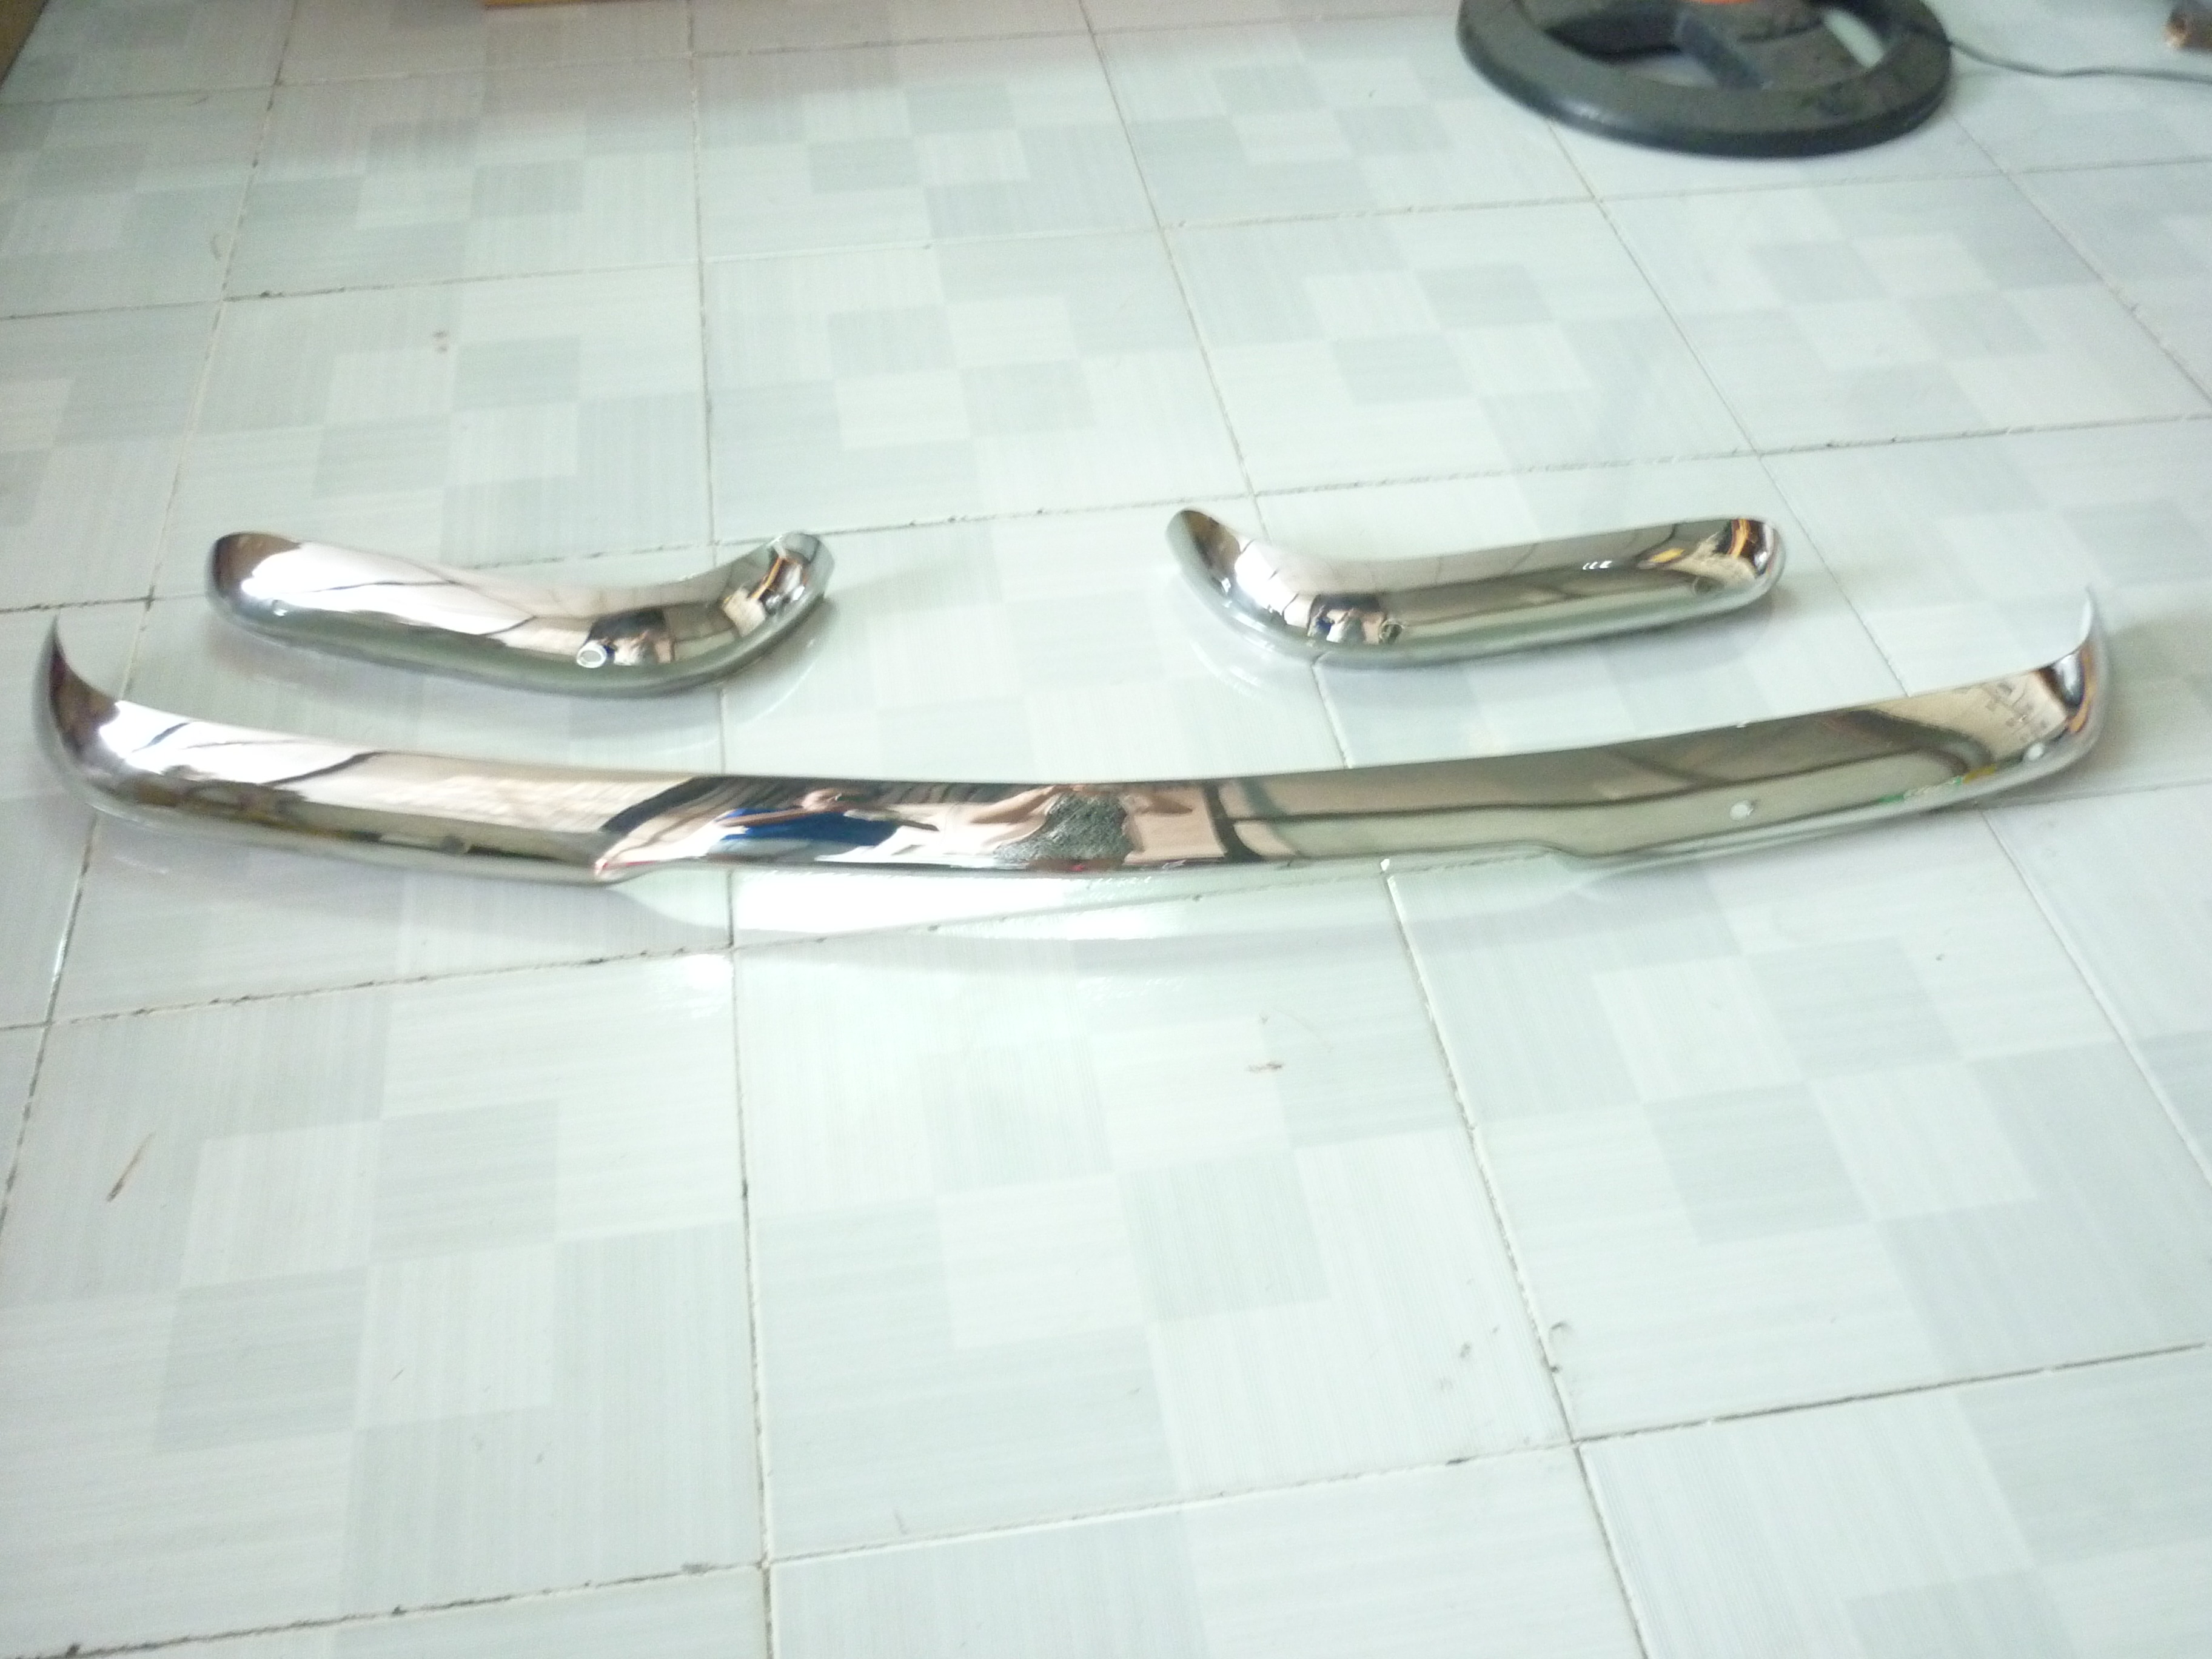 Ford Angelia Stainless Steel BUmper